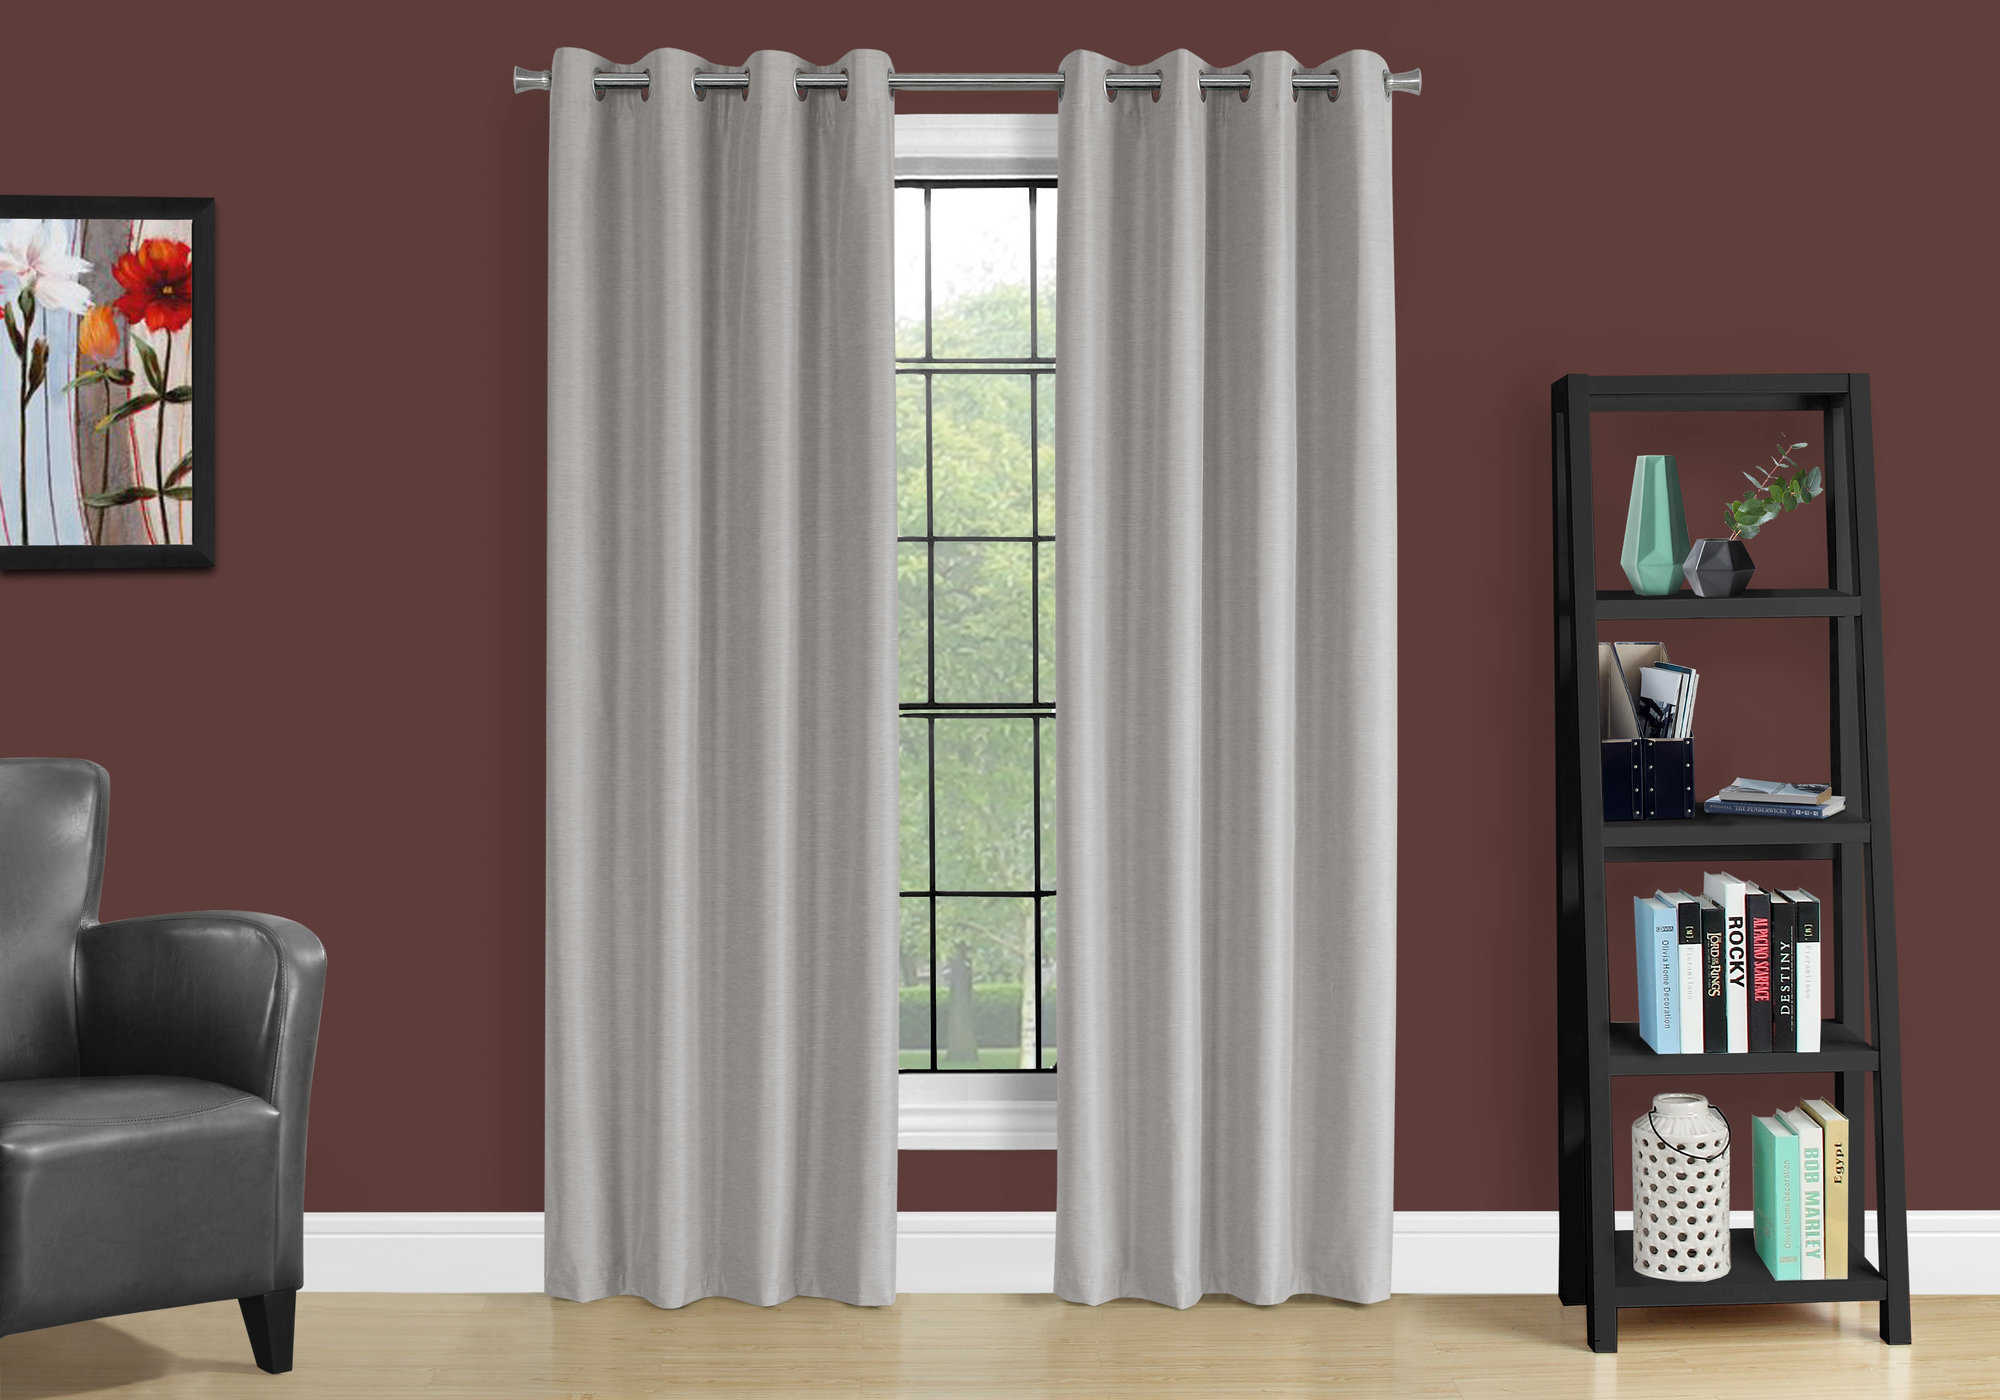 CURTAIN PANEL - 2PCS / 52"W X 84"H SILVER SOLID BLACKOUT